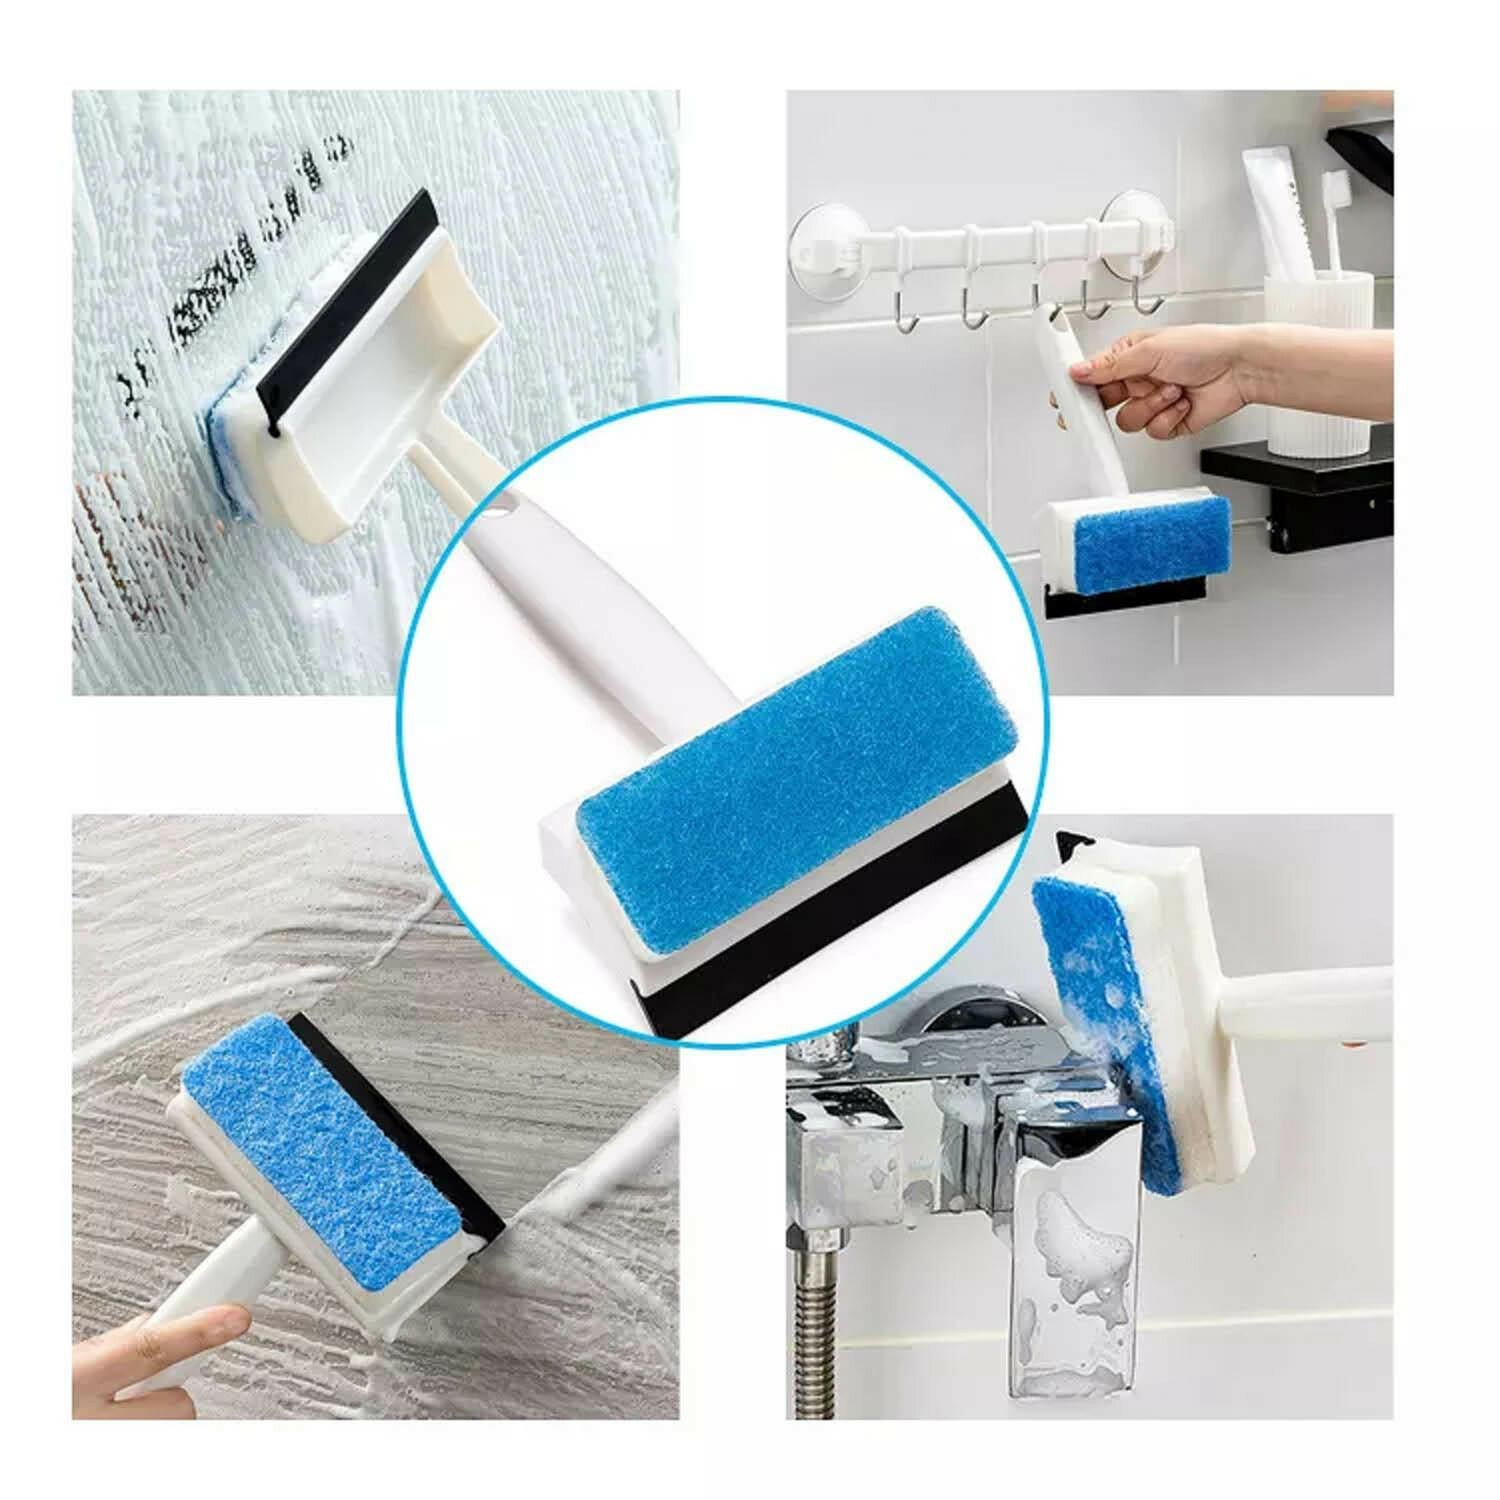 7602 2 in 1 Glass Wiper Cleaning Brush Mirror Grout Tile Cleaner Washing Pot Brush Double-Sided Glass Wipe Bathroom Wiper Window Glass Wiper